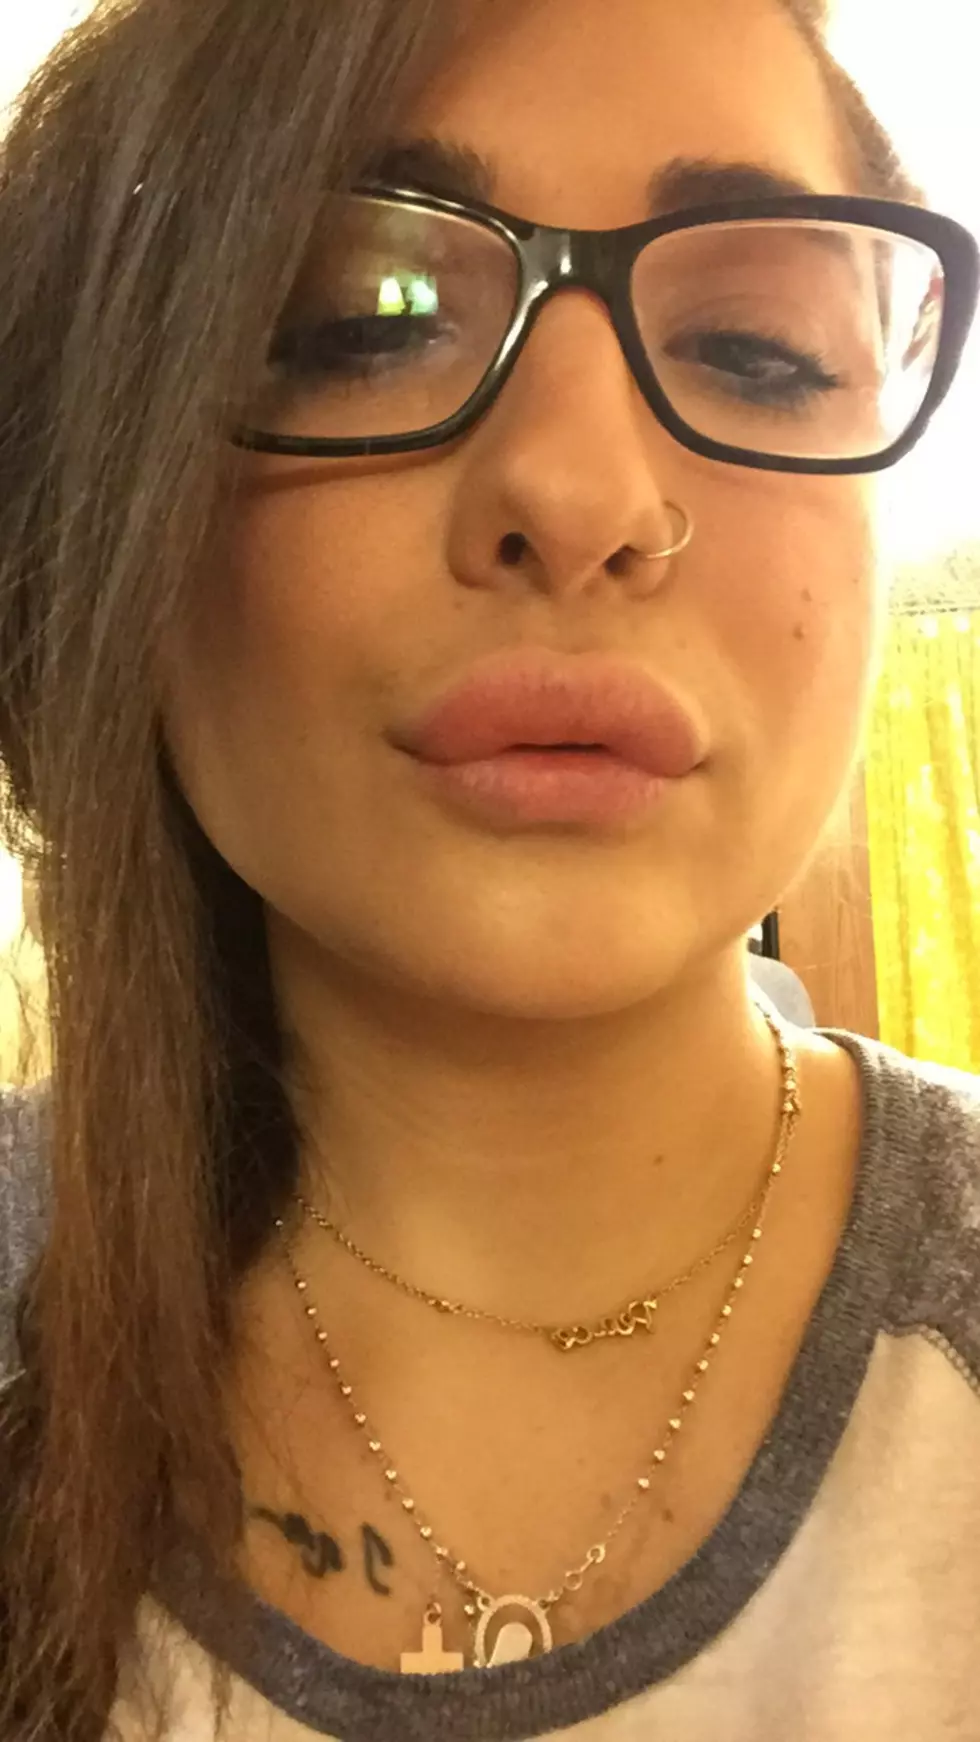 I Had Kylie Jenner Lips for a Day (Sort of) [Pictures]